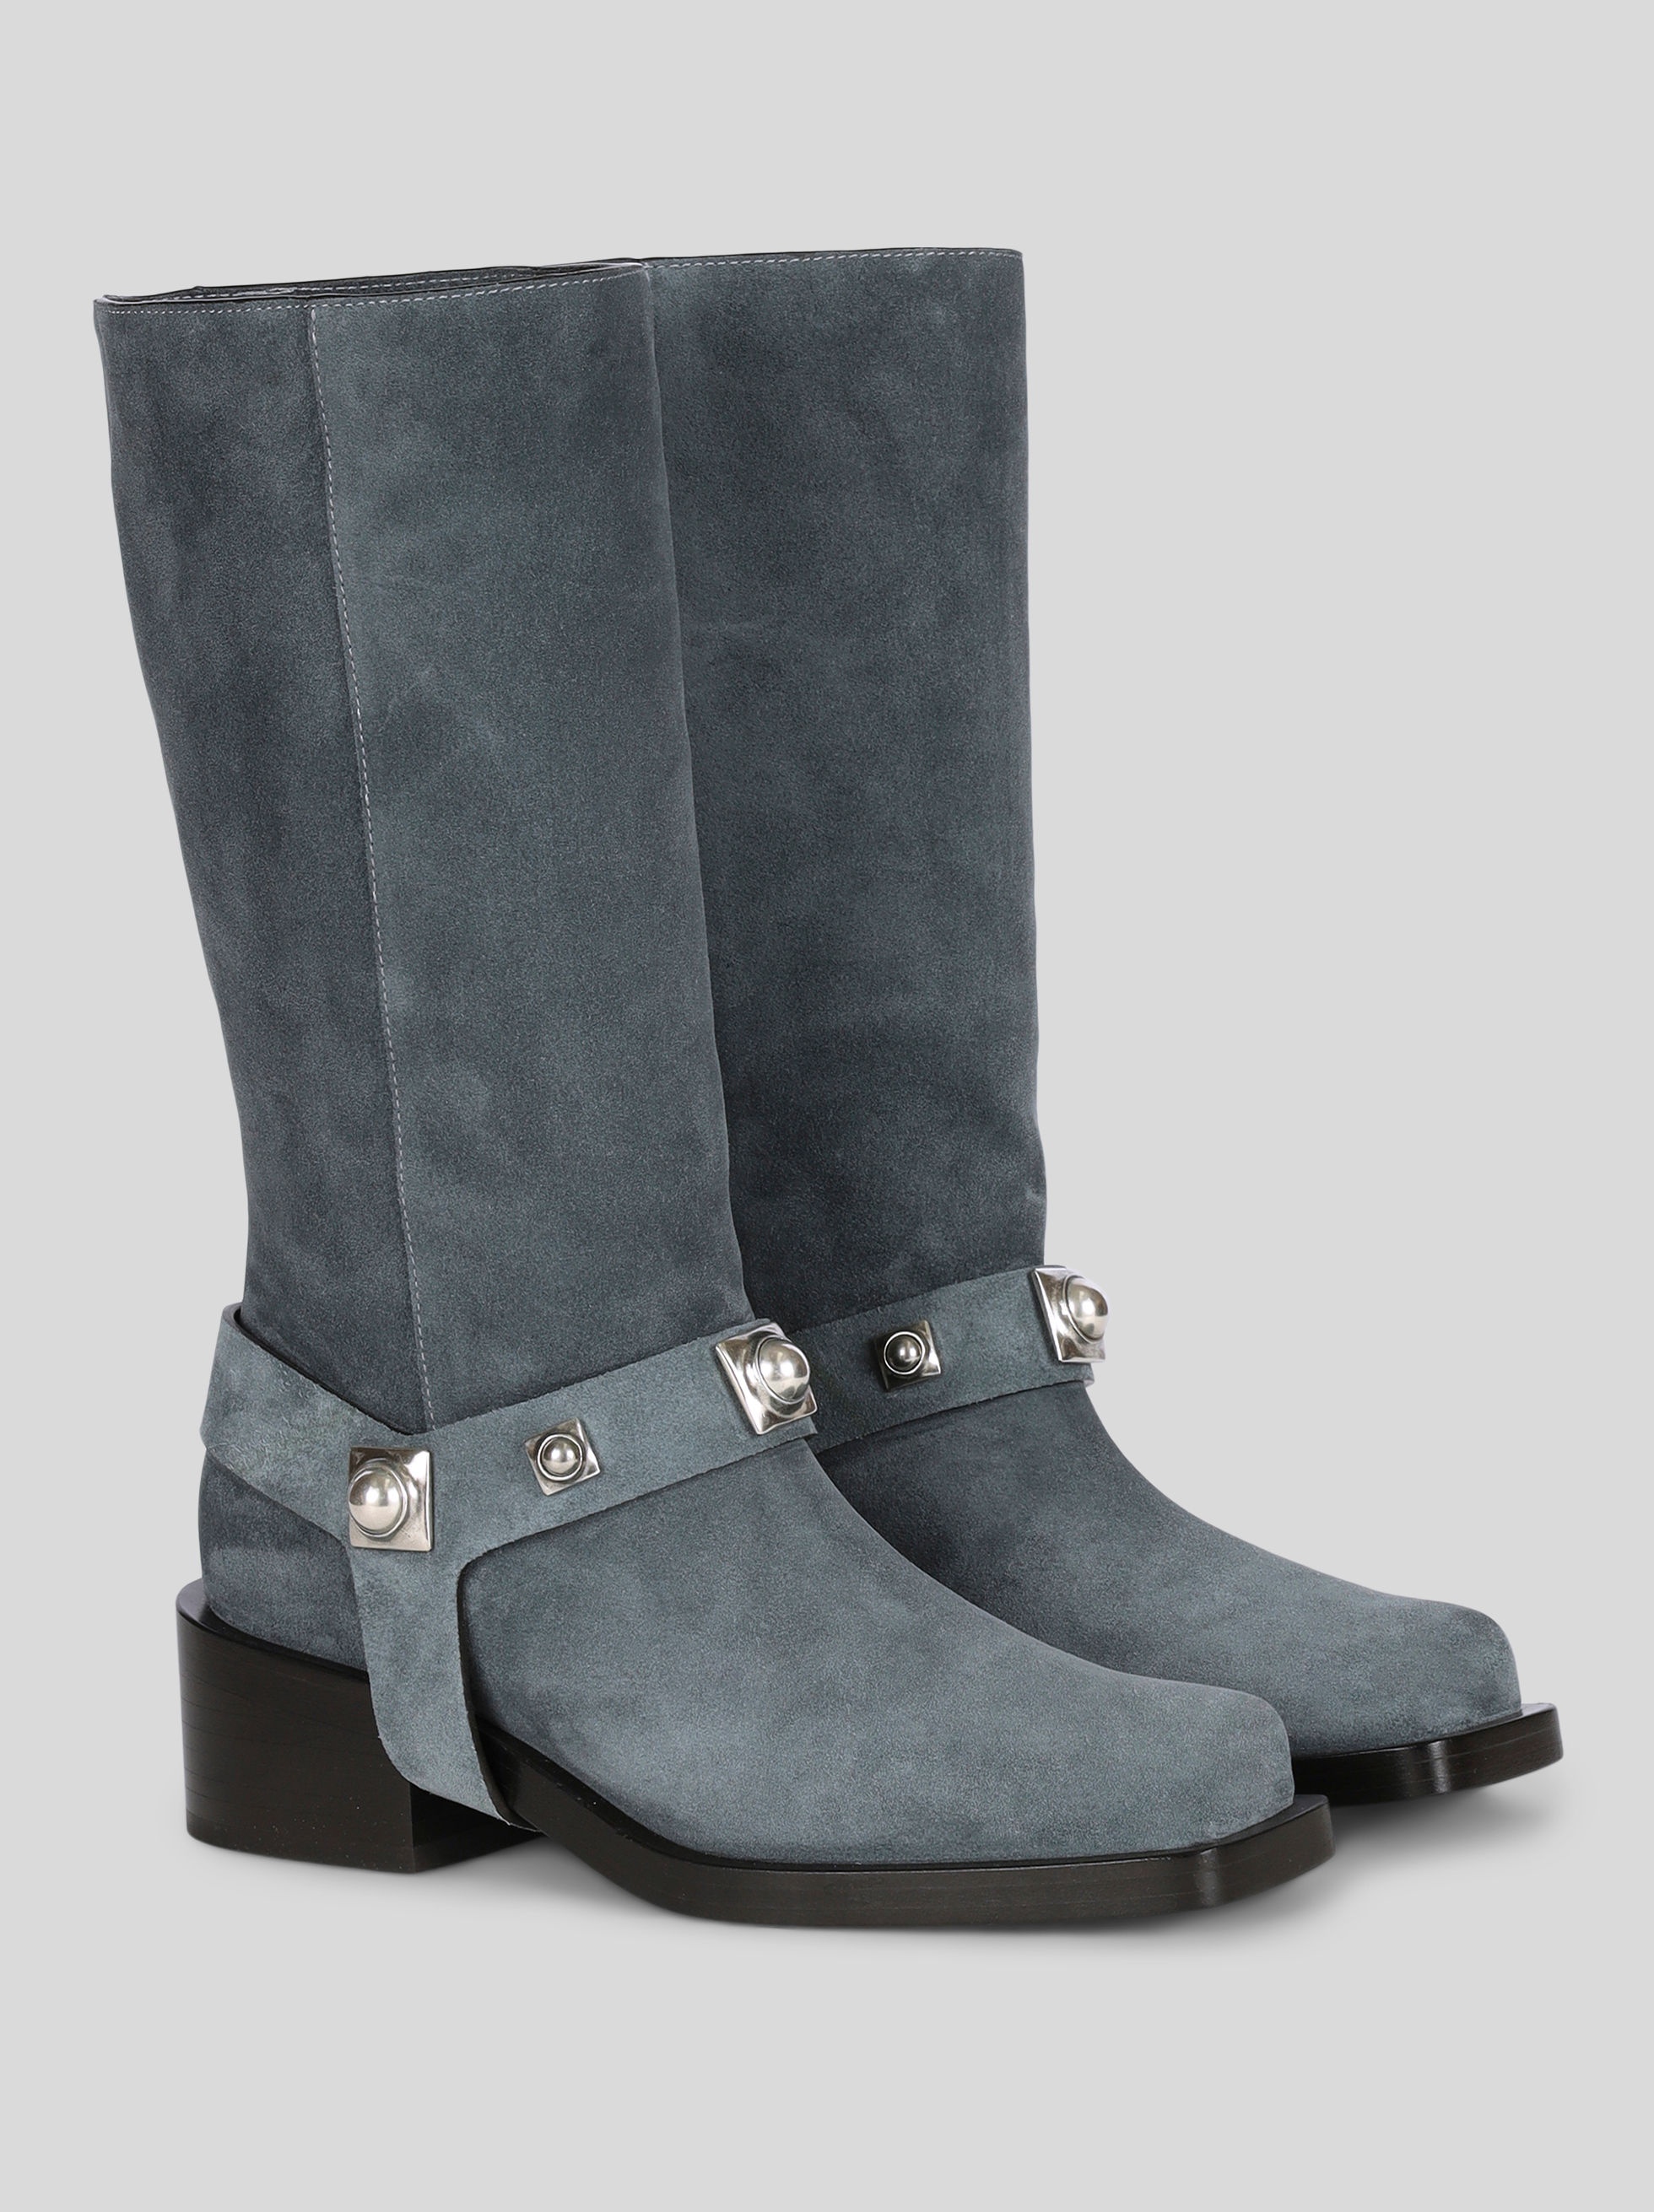 SUEDE BOOTS WITH CROWN ME STUDS - 3